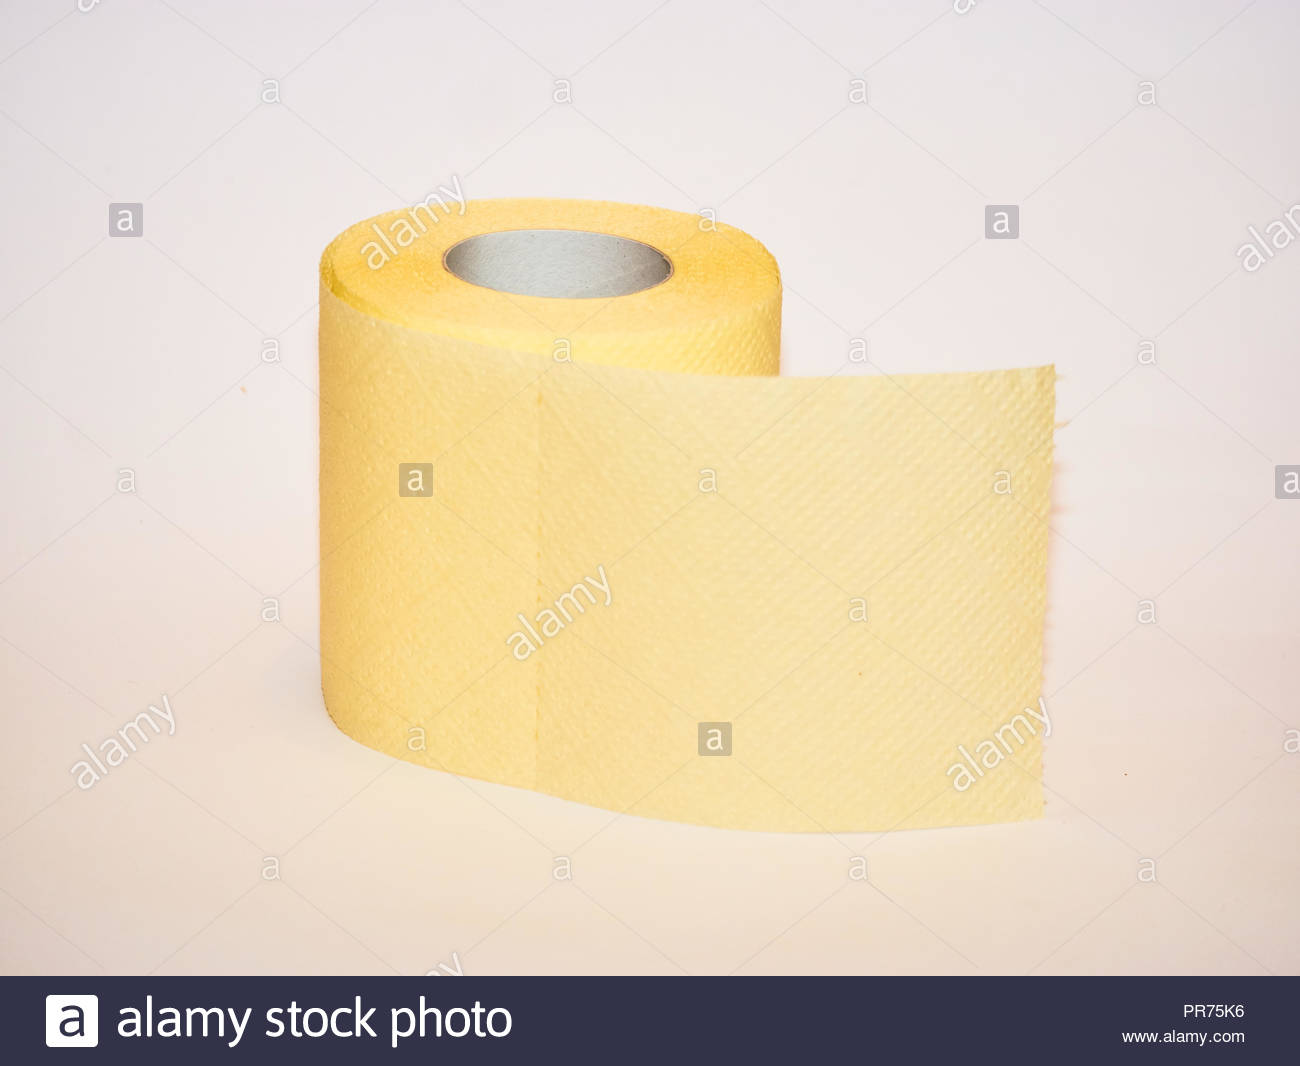 Toilet Paper Tissue Yellow Roll Isolated On White